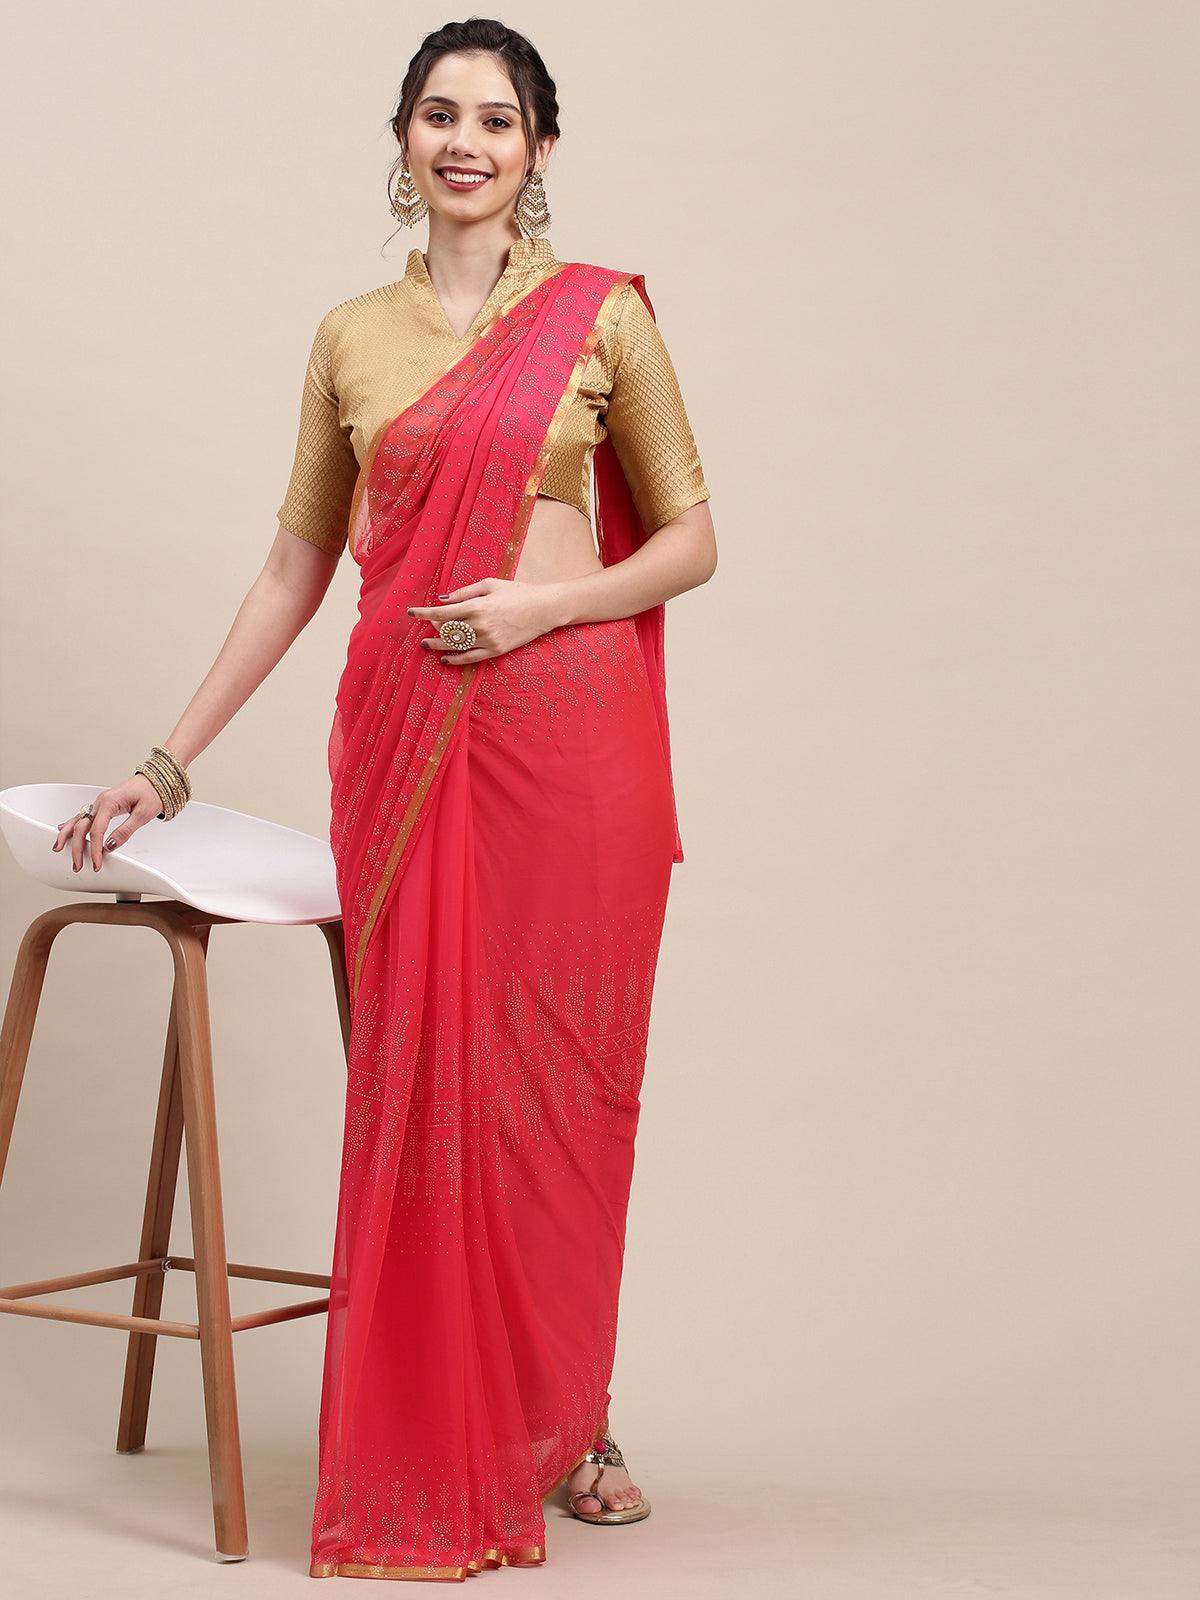 Women's Peach Chiffon Woven Border Saree With Unstitched Blouse - Odette